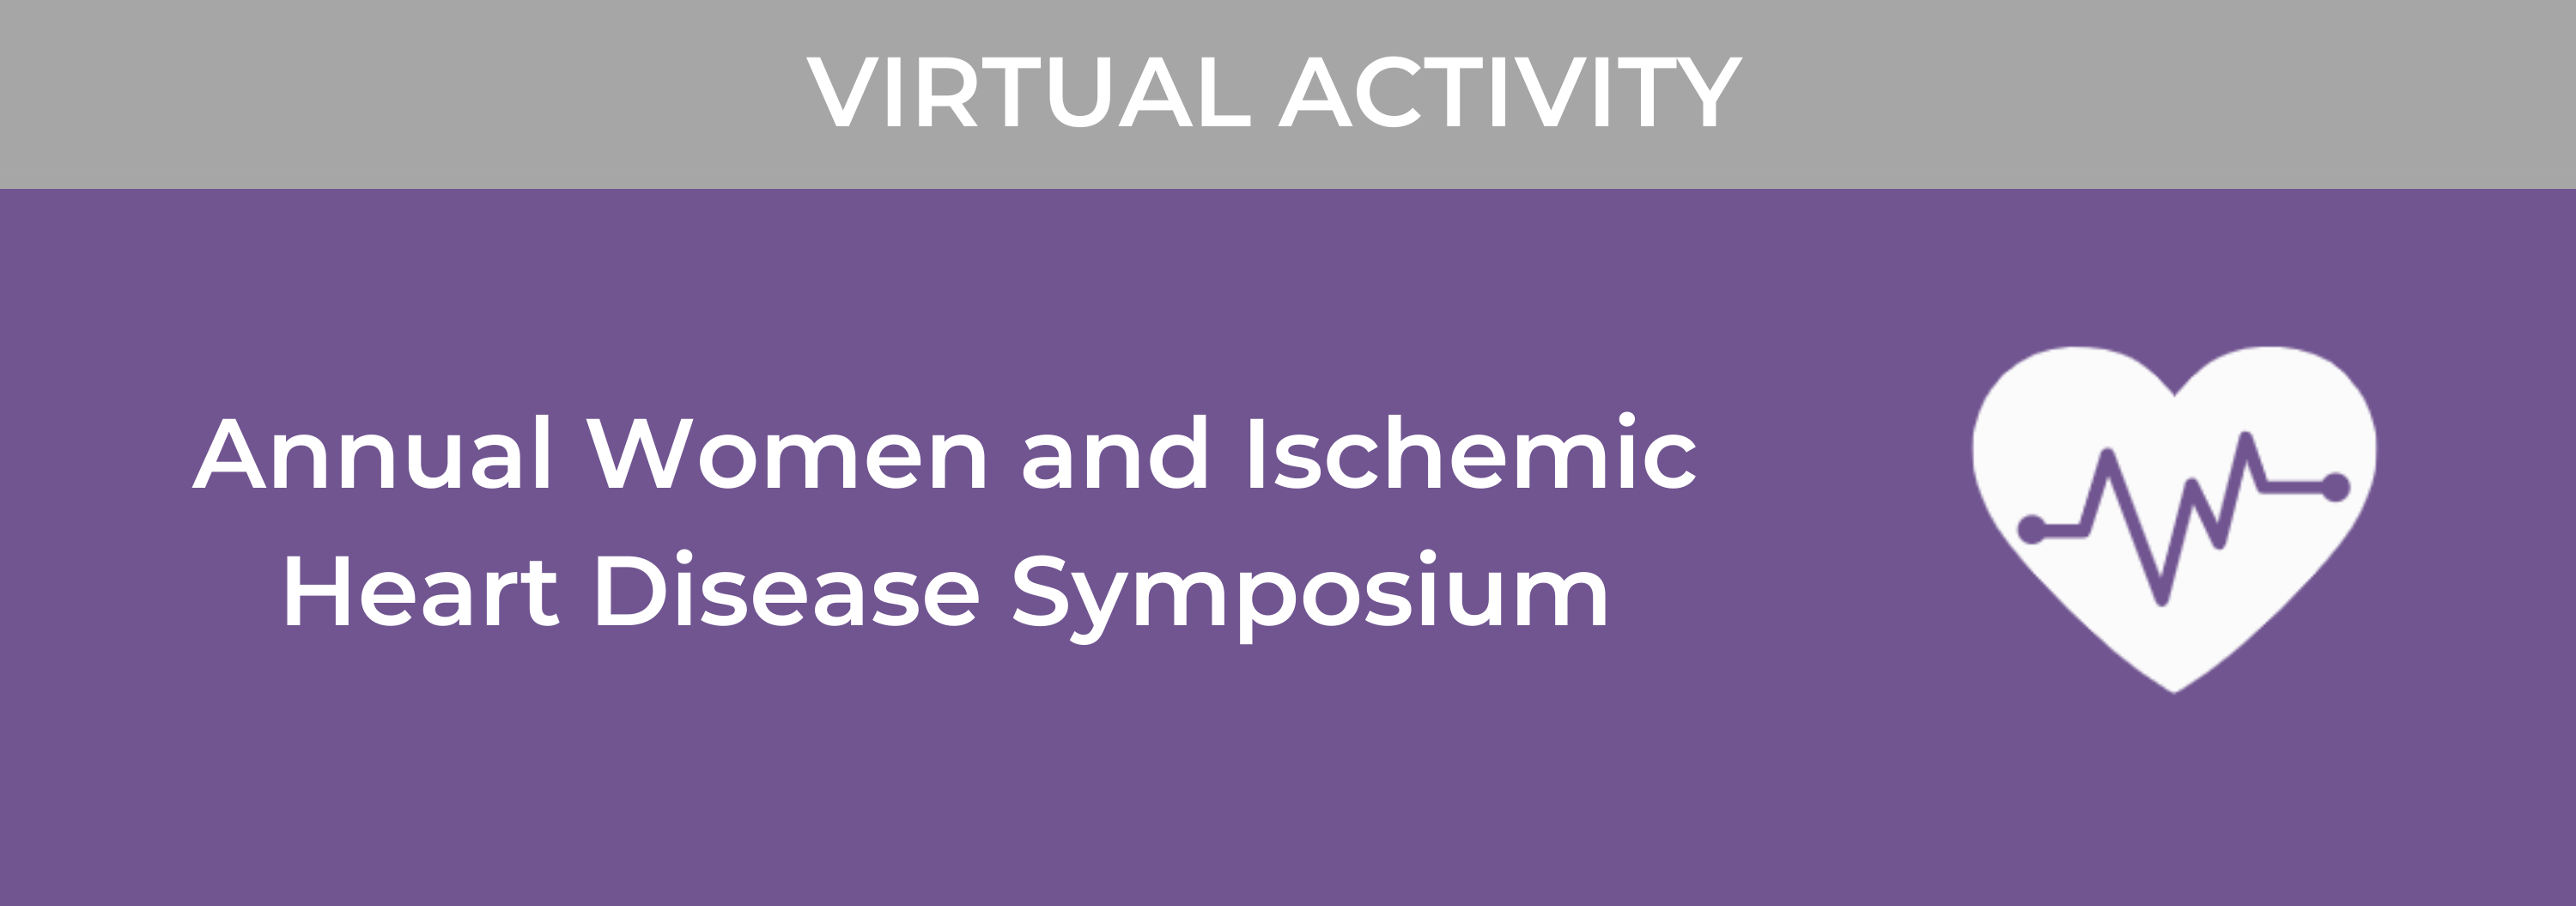 16th Annual Women and Ischemic Heart Disease Symposium Banner